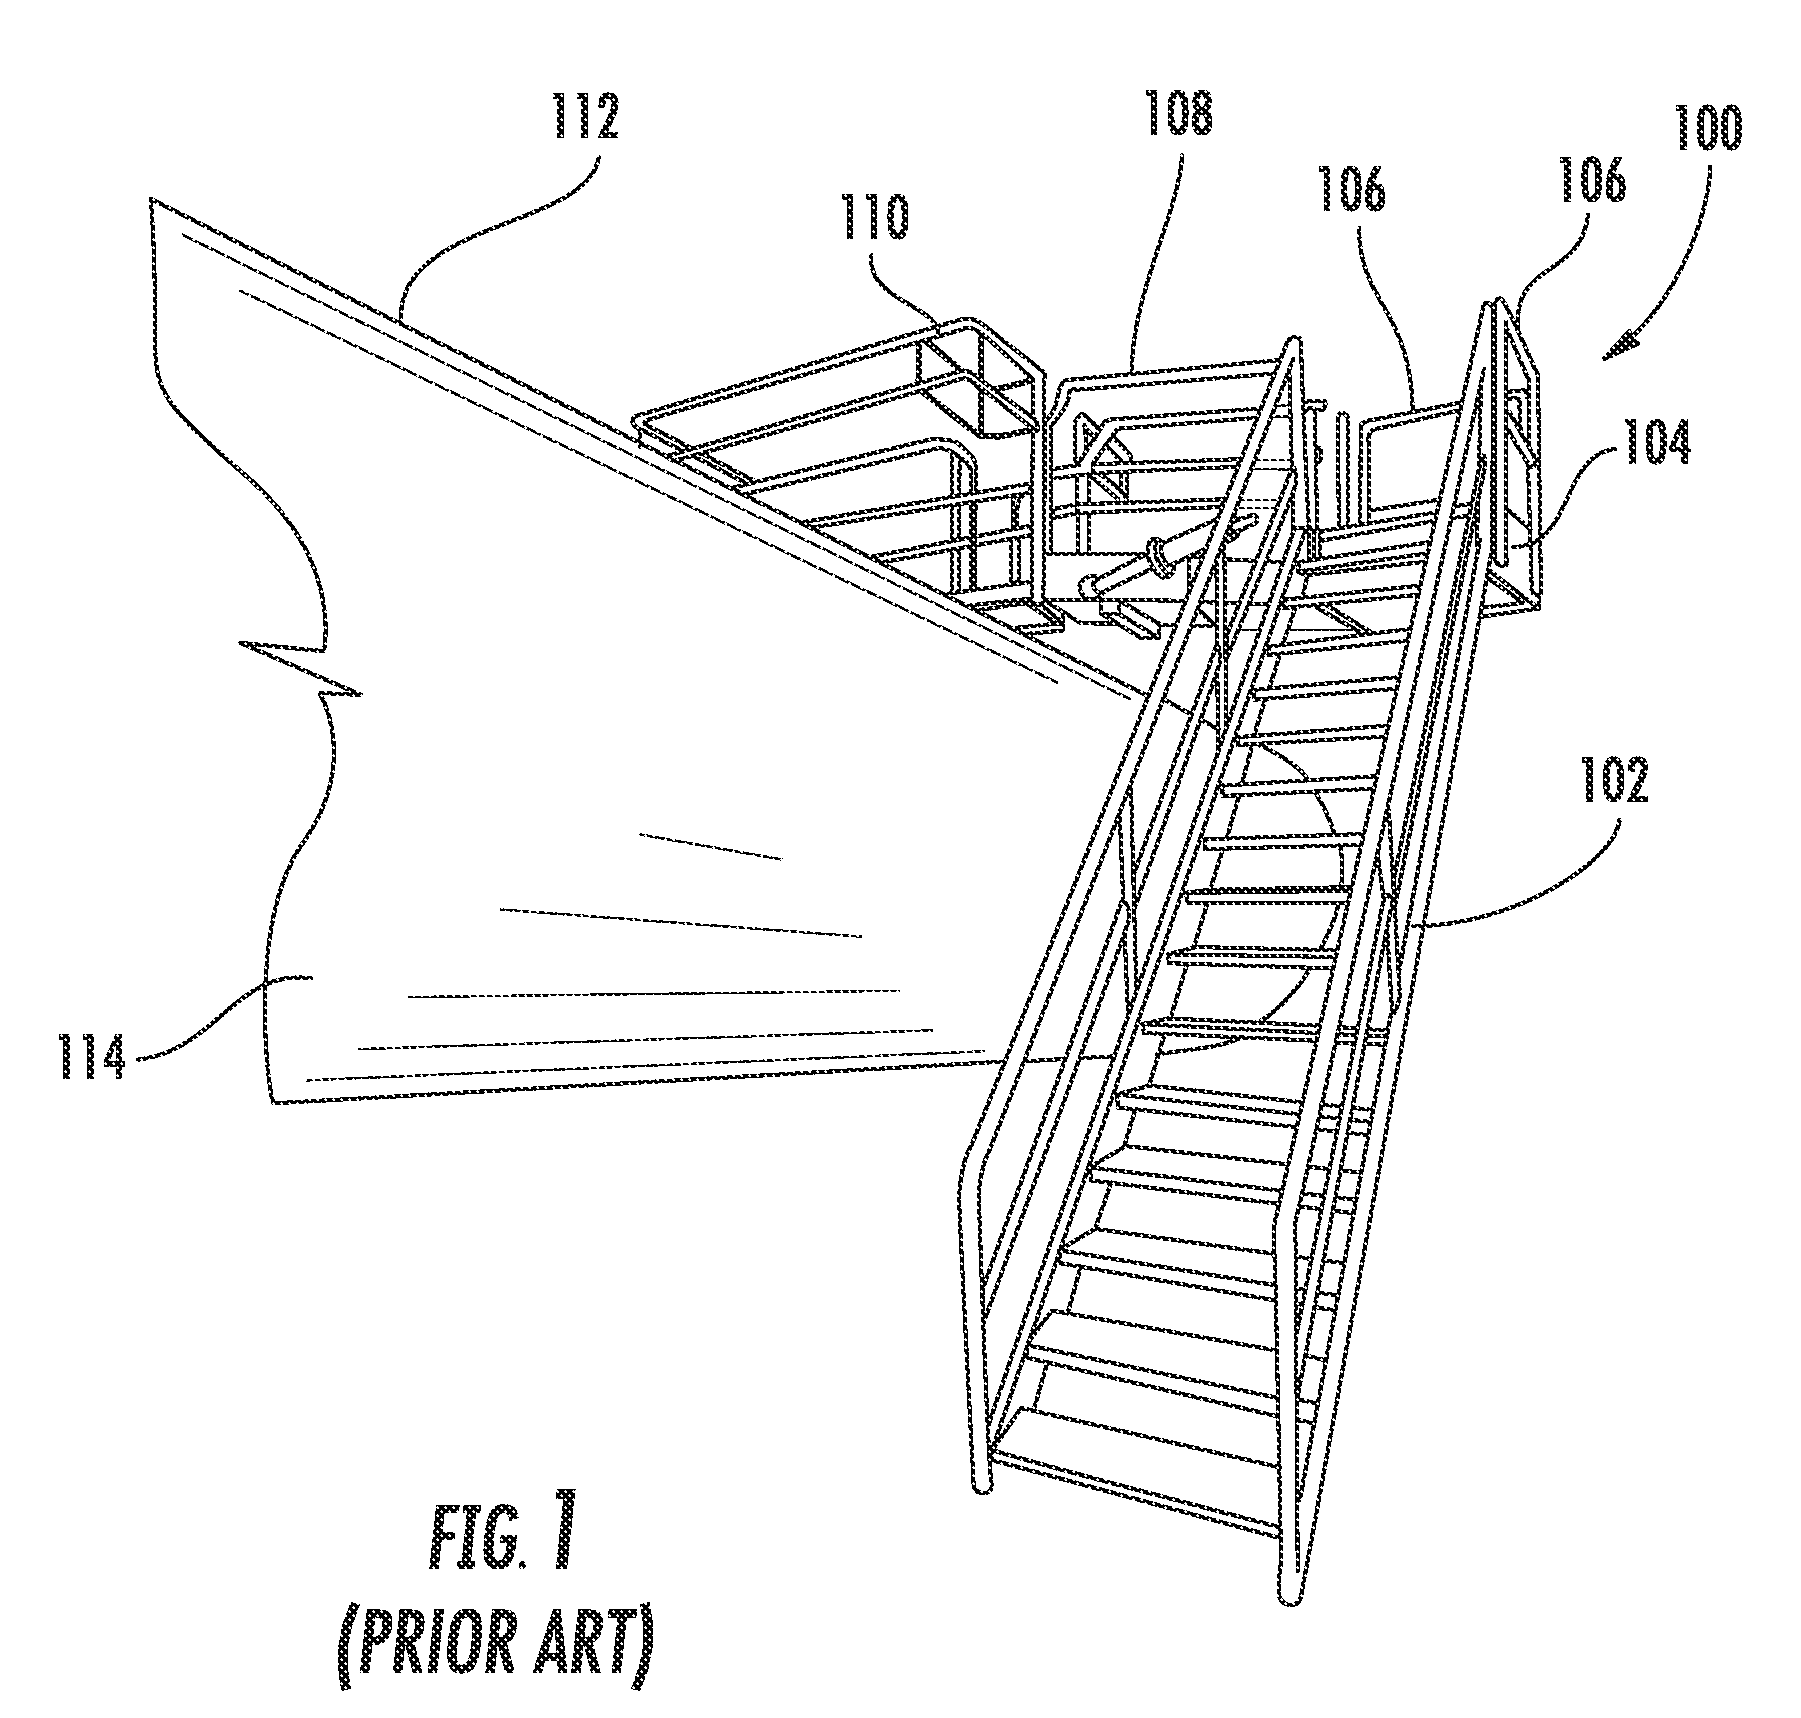 Fall restraint equipment components and method for manufacturing the same